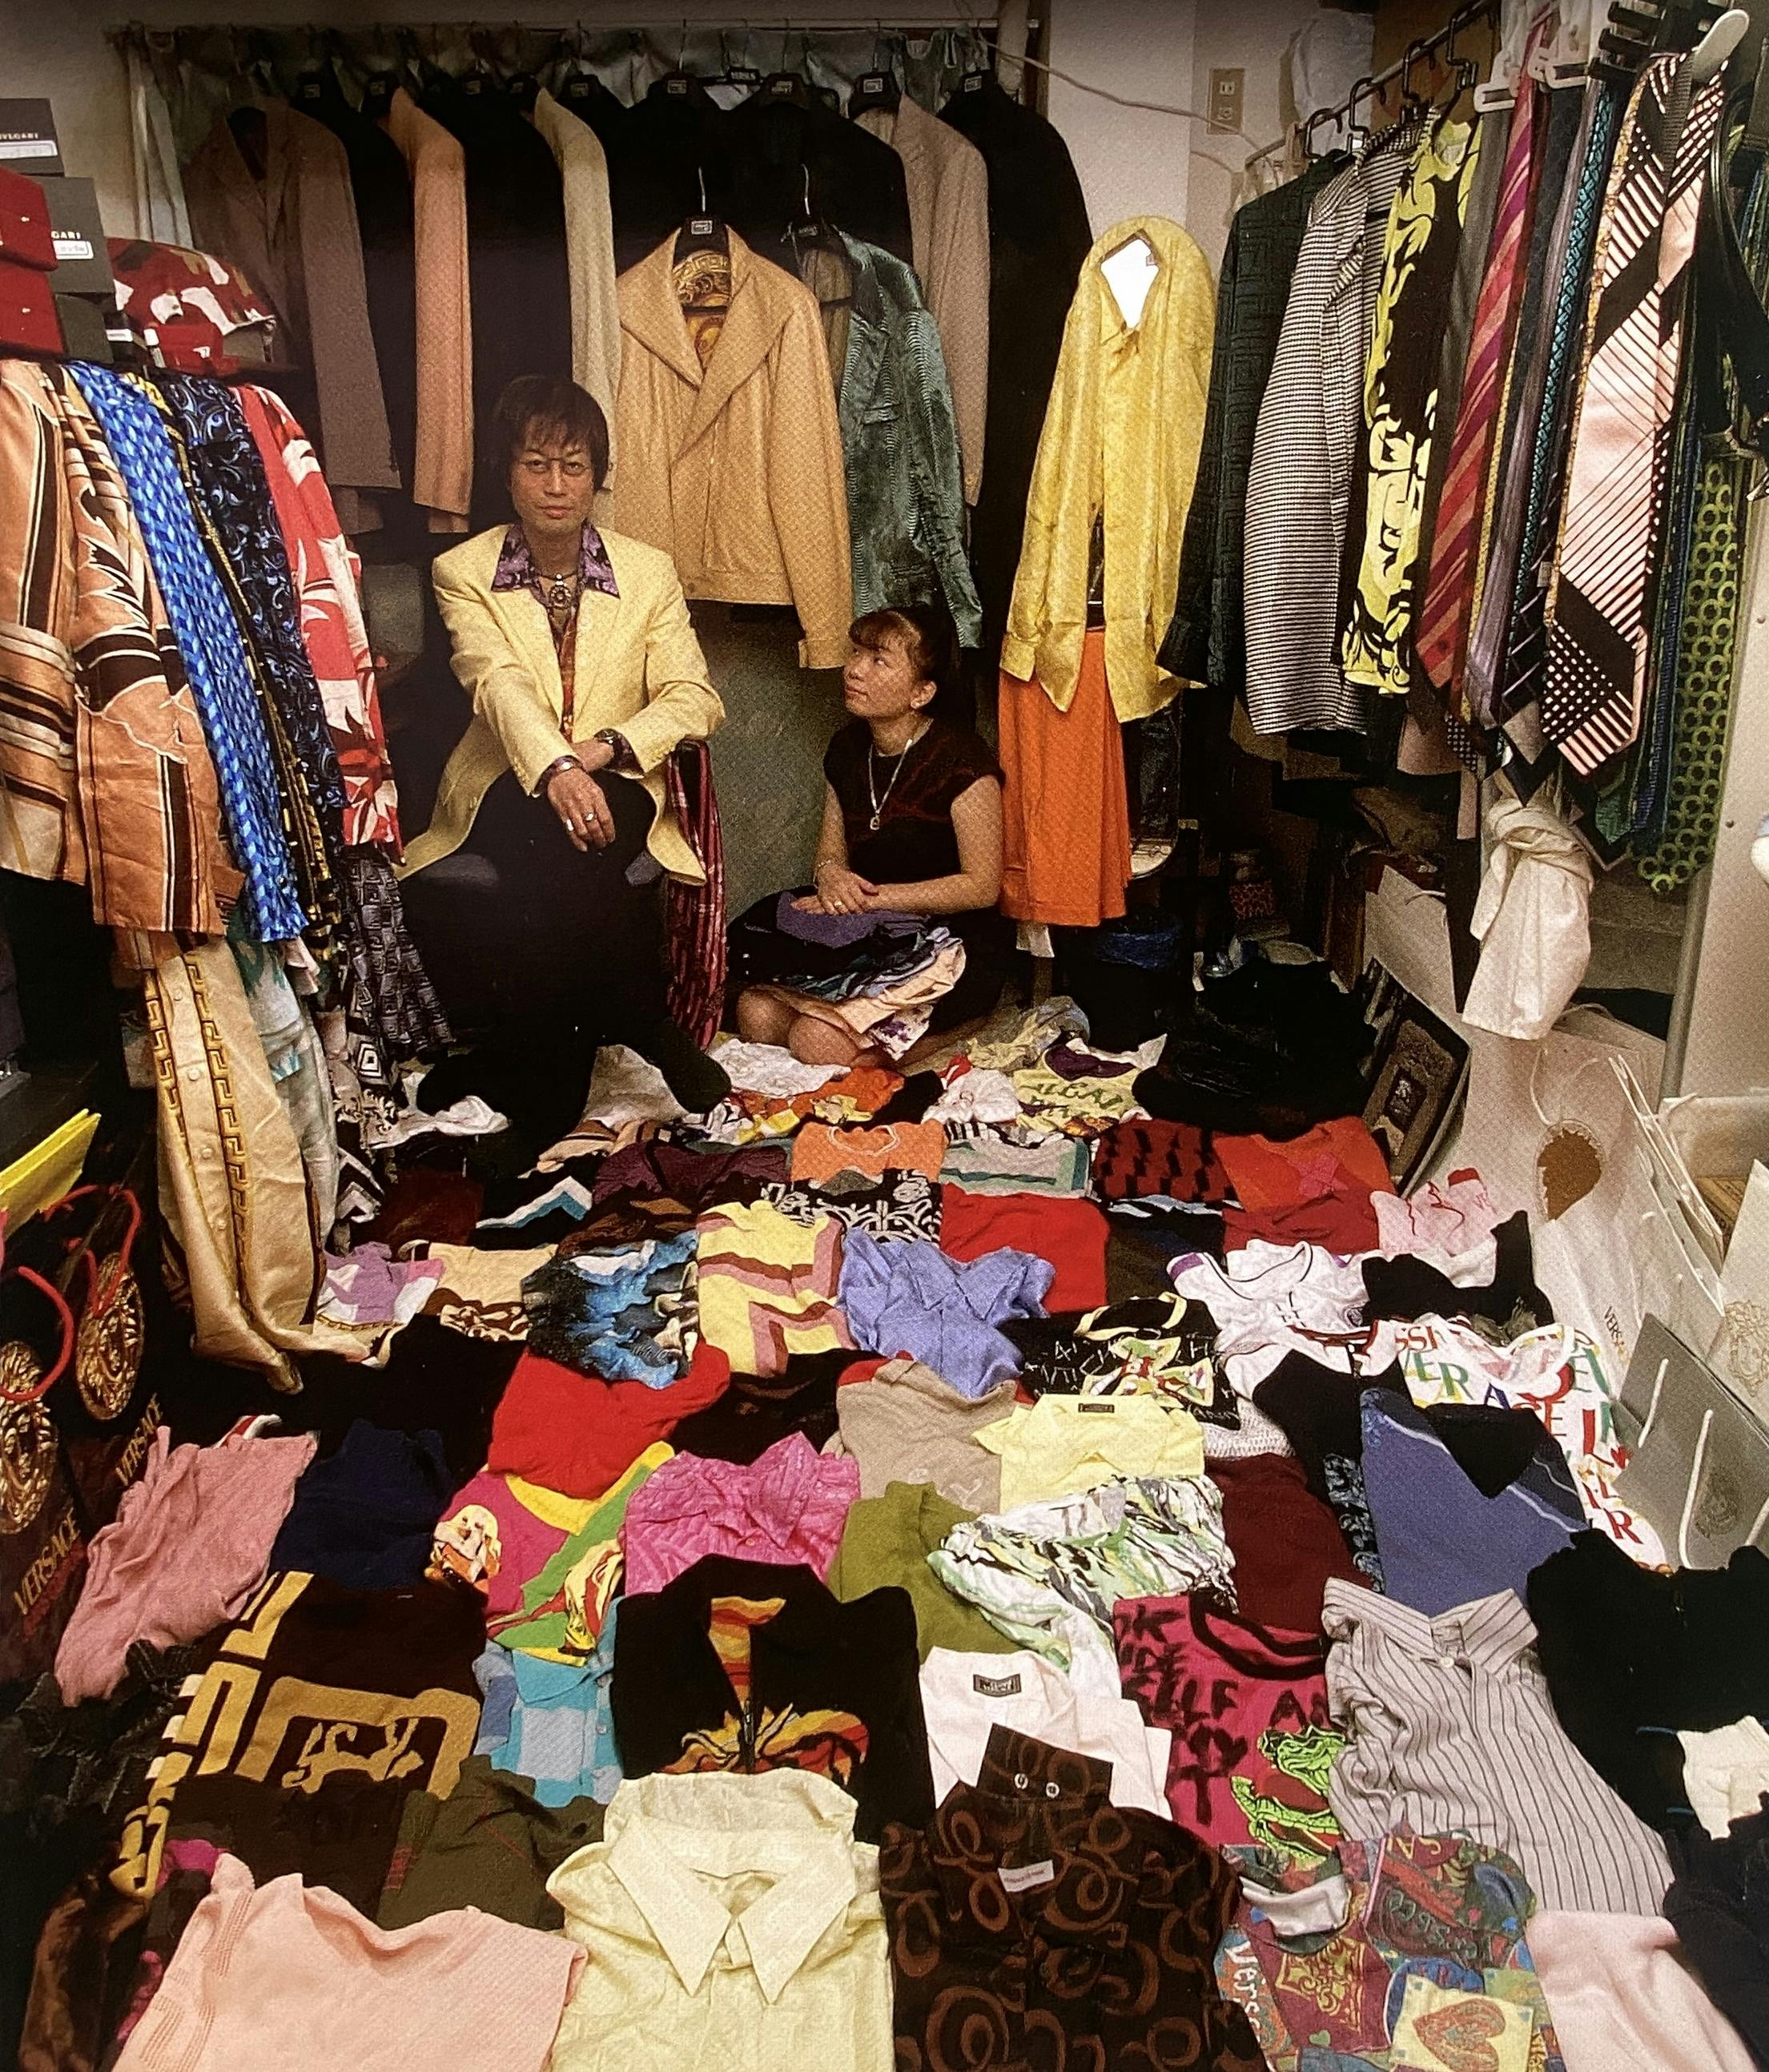 A Photo taken by Kyoichi Tsuzuki from his book HAPPY VICTIMS, showcasing two 'Fashion Victims' and their collection at home